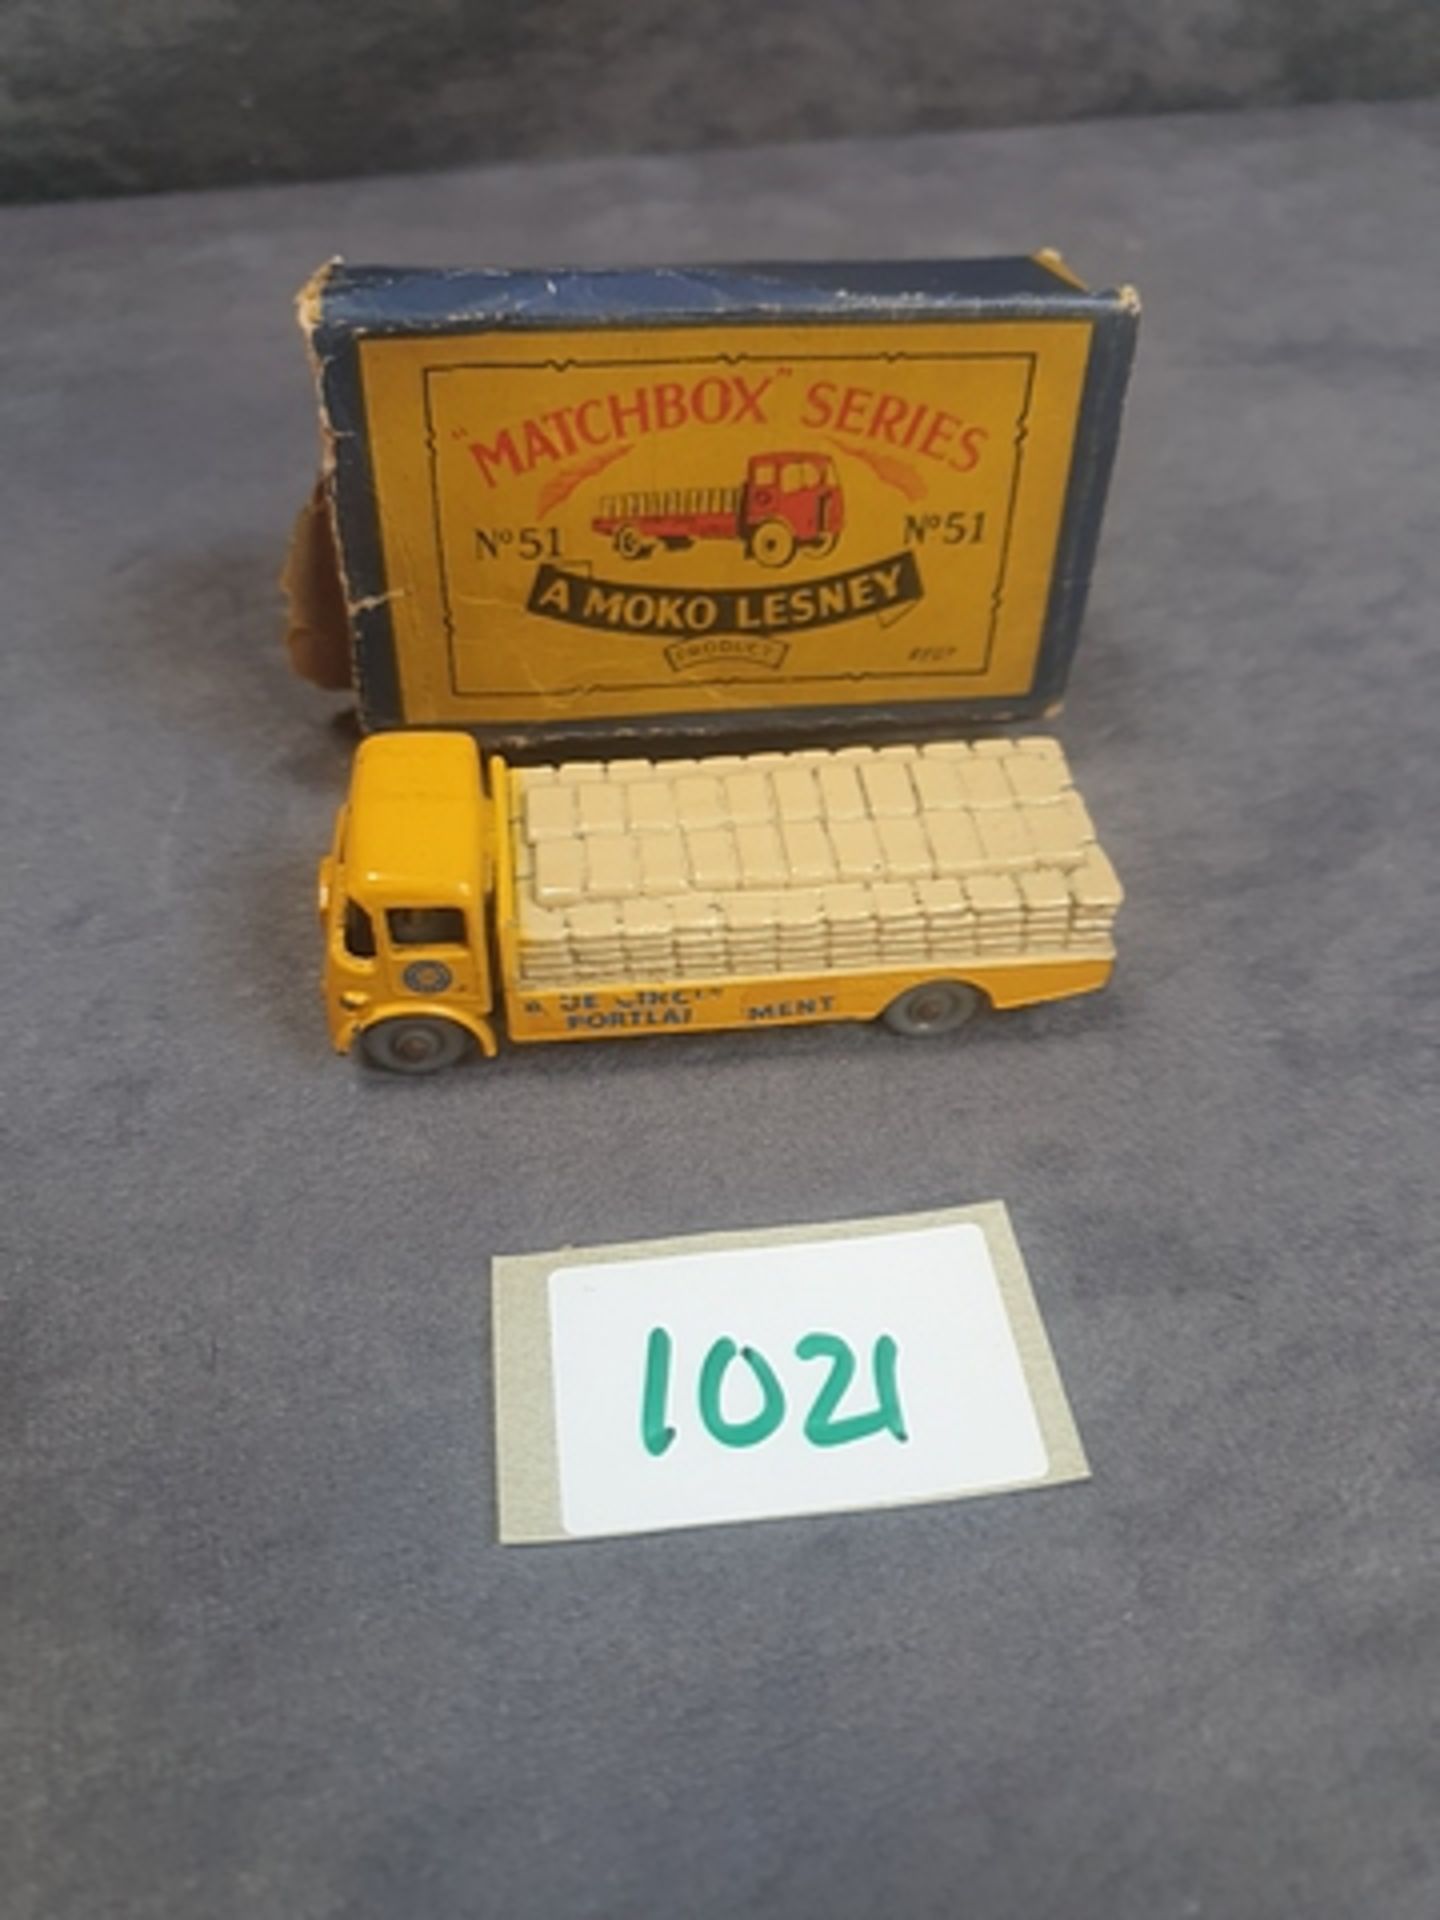 Matchbox Lesney Moko #51 Portland Cement Albion Chieftain Truck Completed With Box (Box Is Damaged) - Image 2 of 2